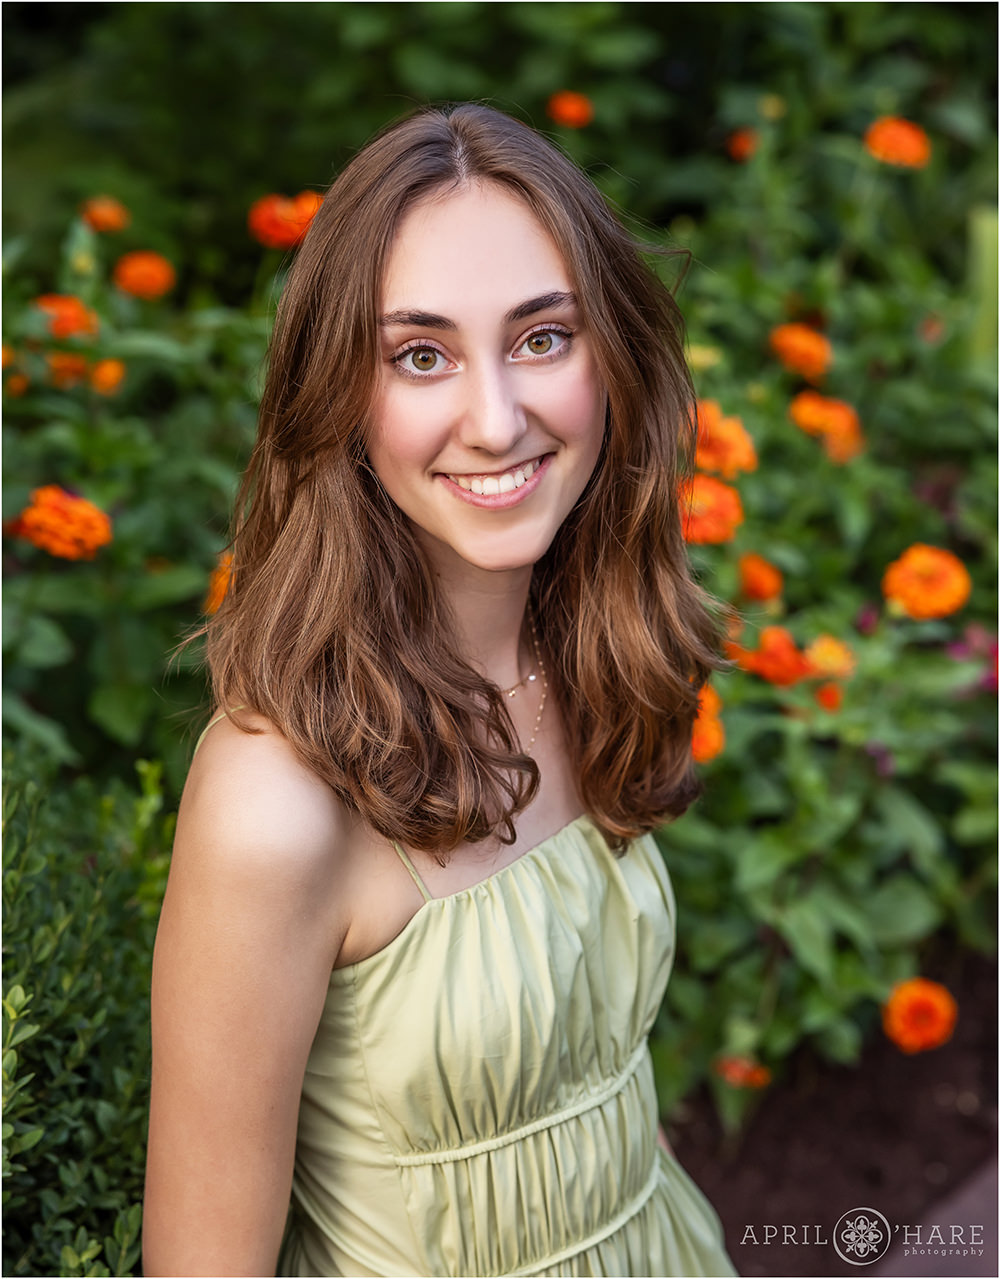 Beautiful orange floral backdrop for a high school senior girl wearing a light green outfit at Denver Botanic Gardens in Colorado